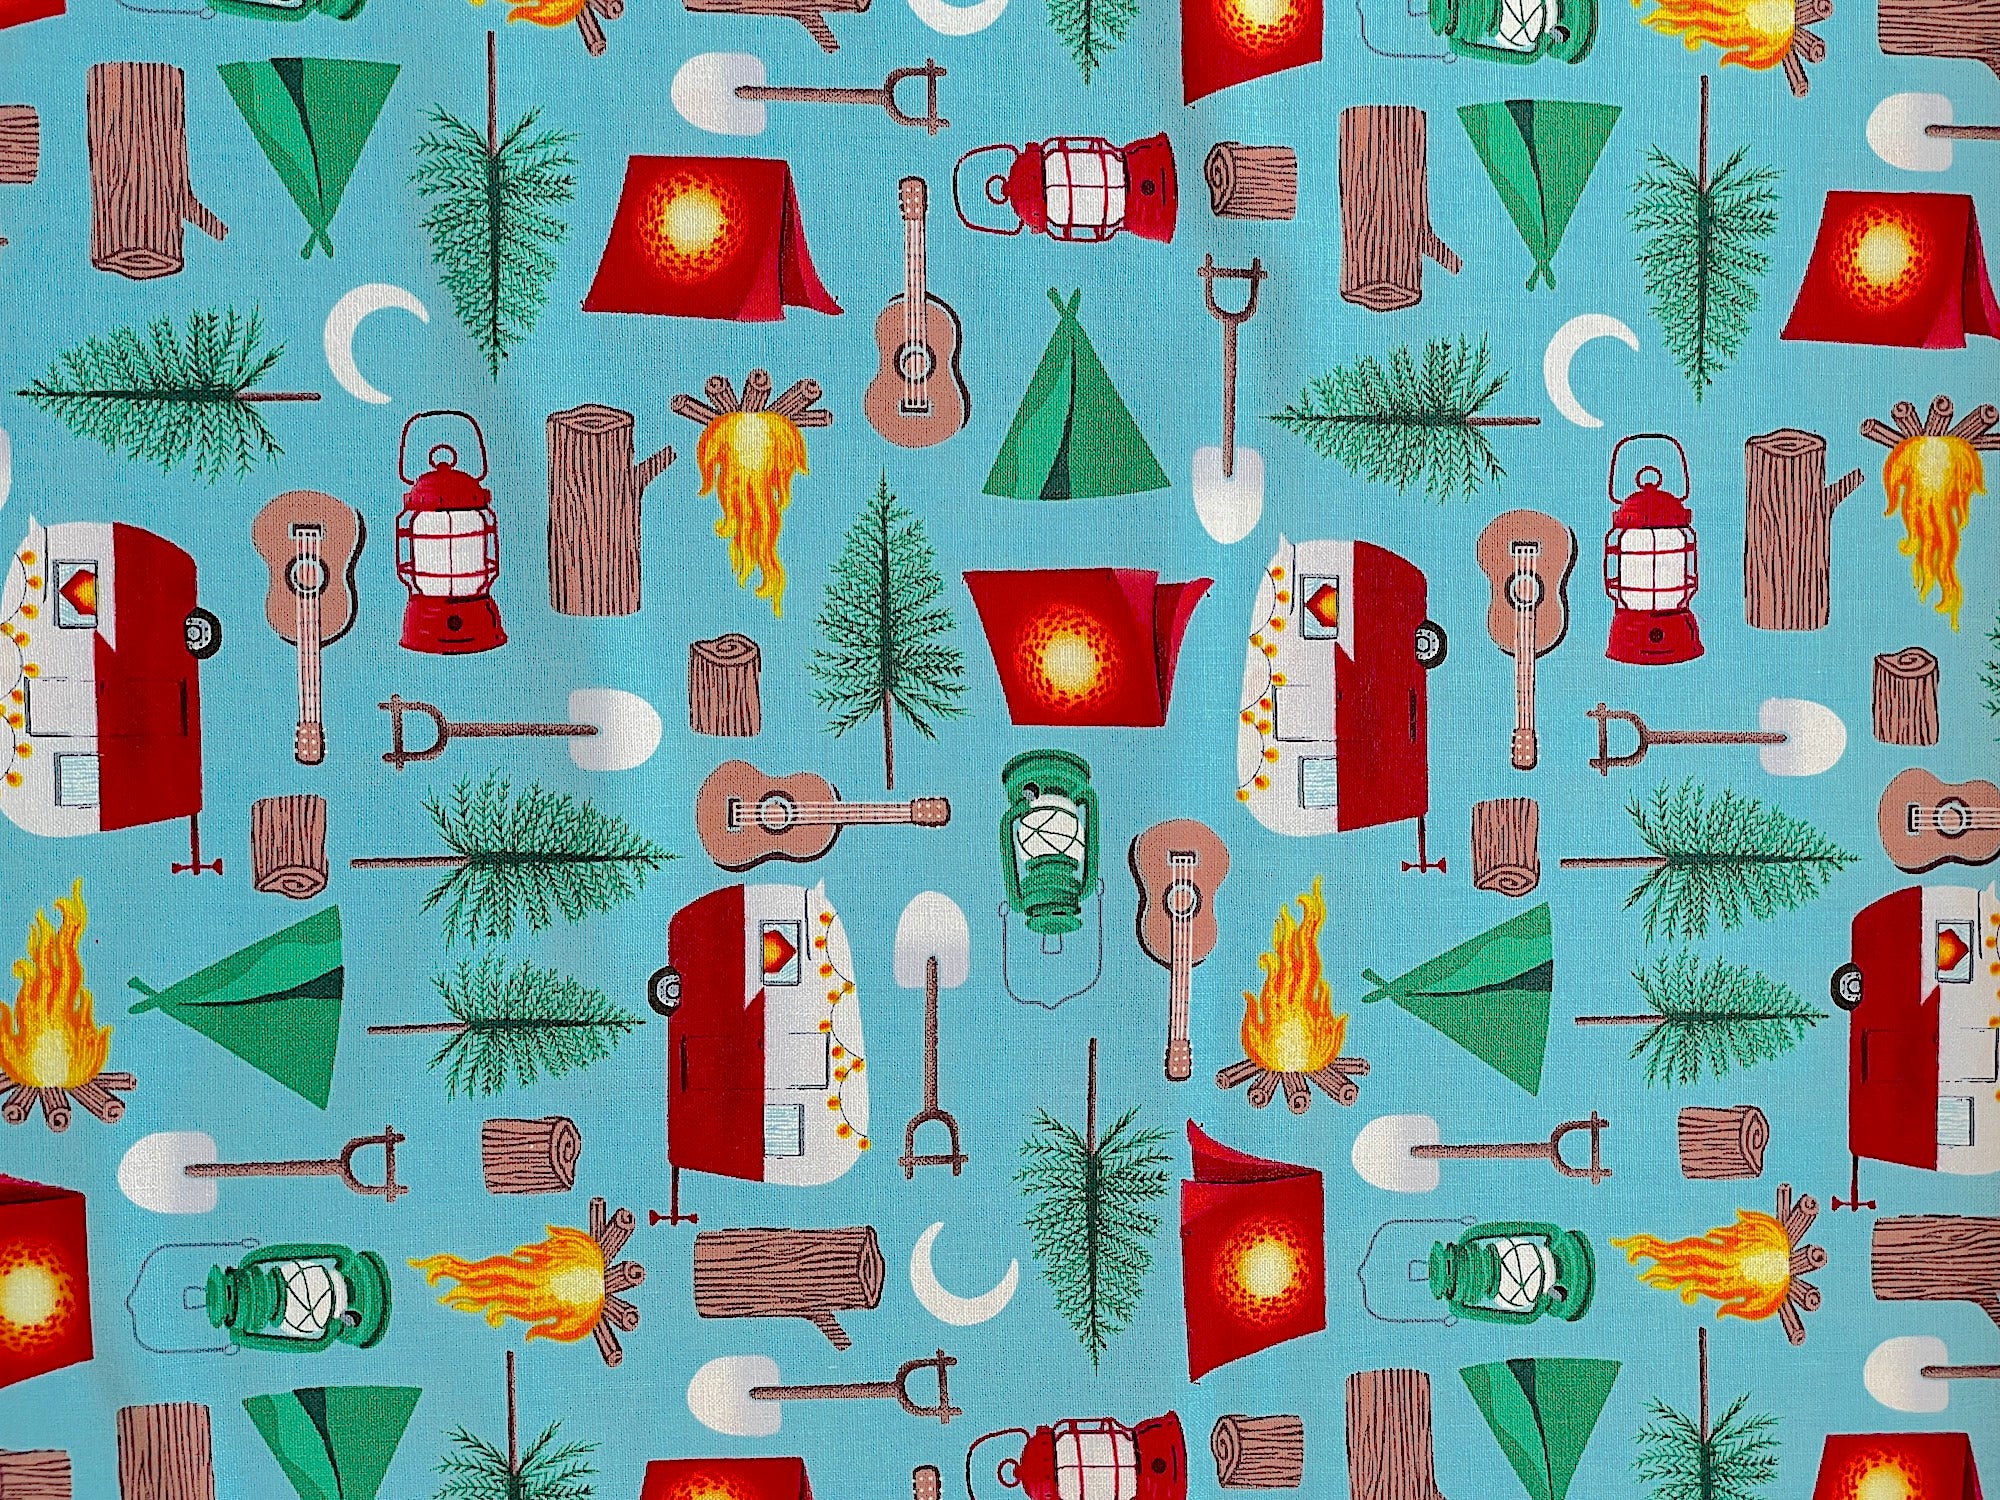 Cotton fabric covered with travel trailers, tents, trees, guitars and more.